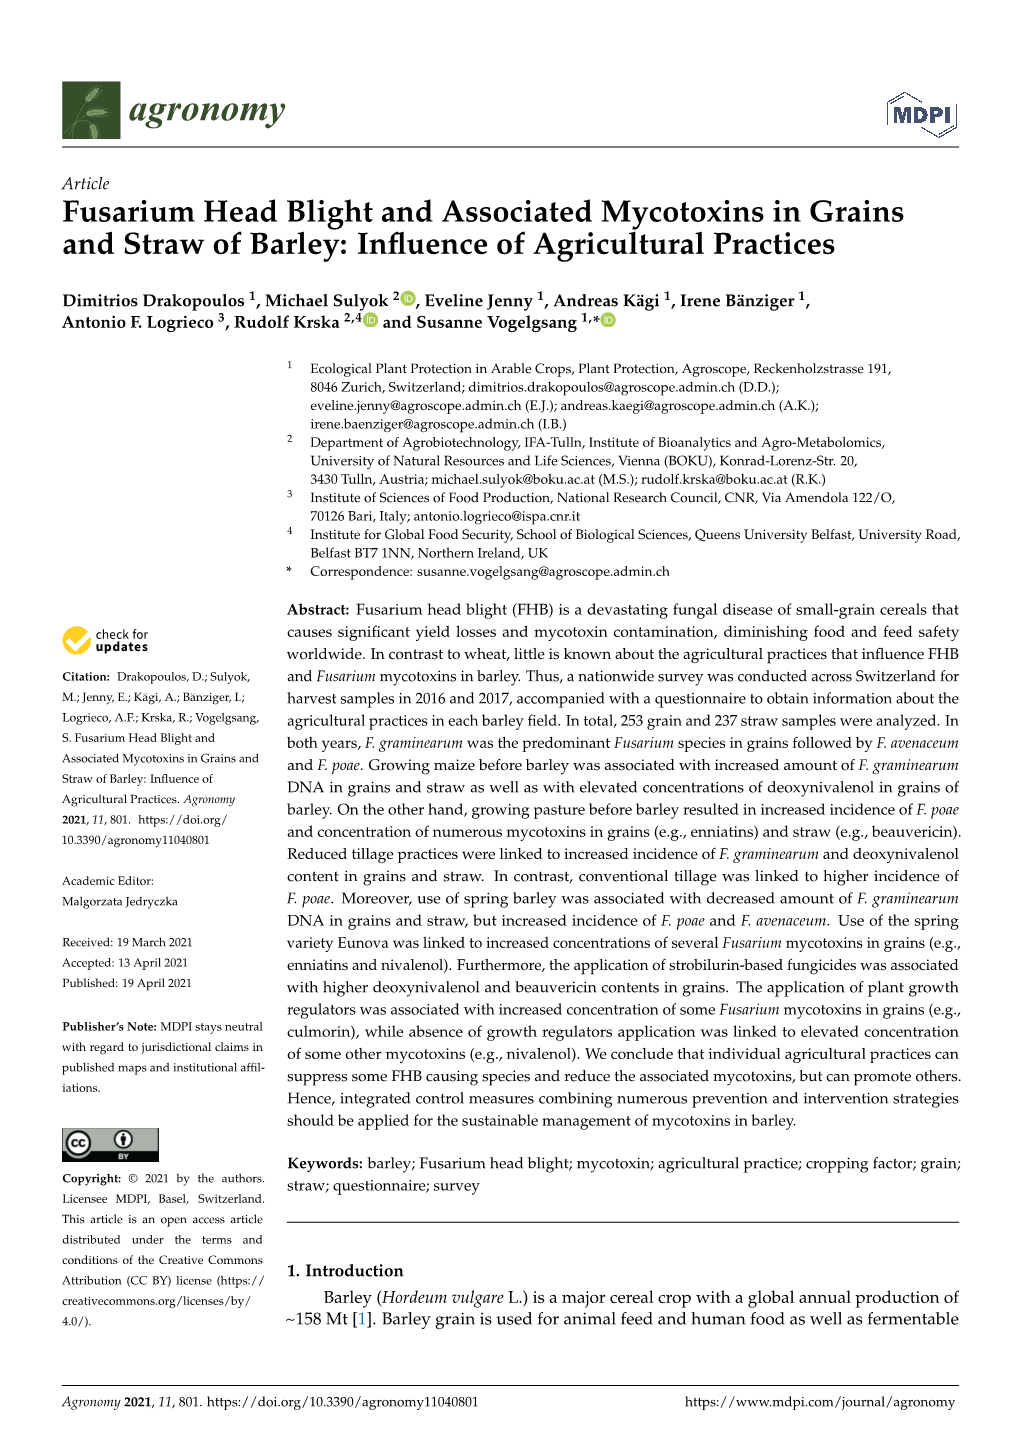 Fusarium Head Blight and Associated Mycotoxins in Grains and Straw of Barley: Inﬂuence of Agricultural Practices